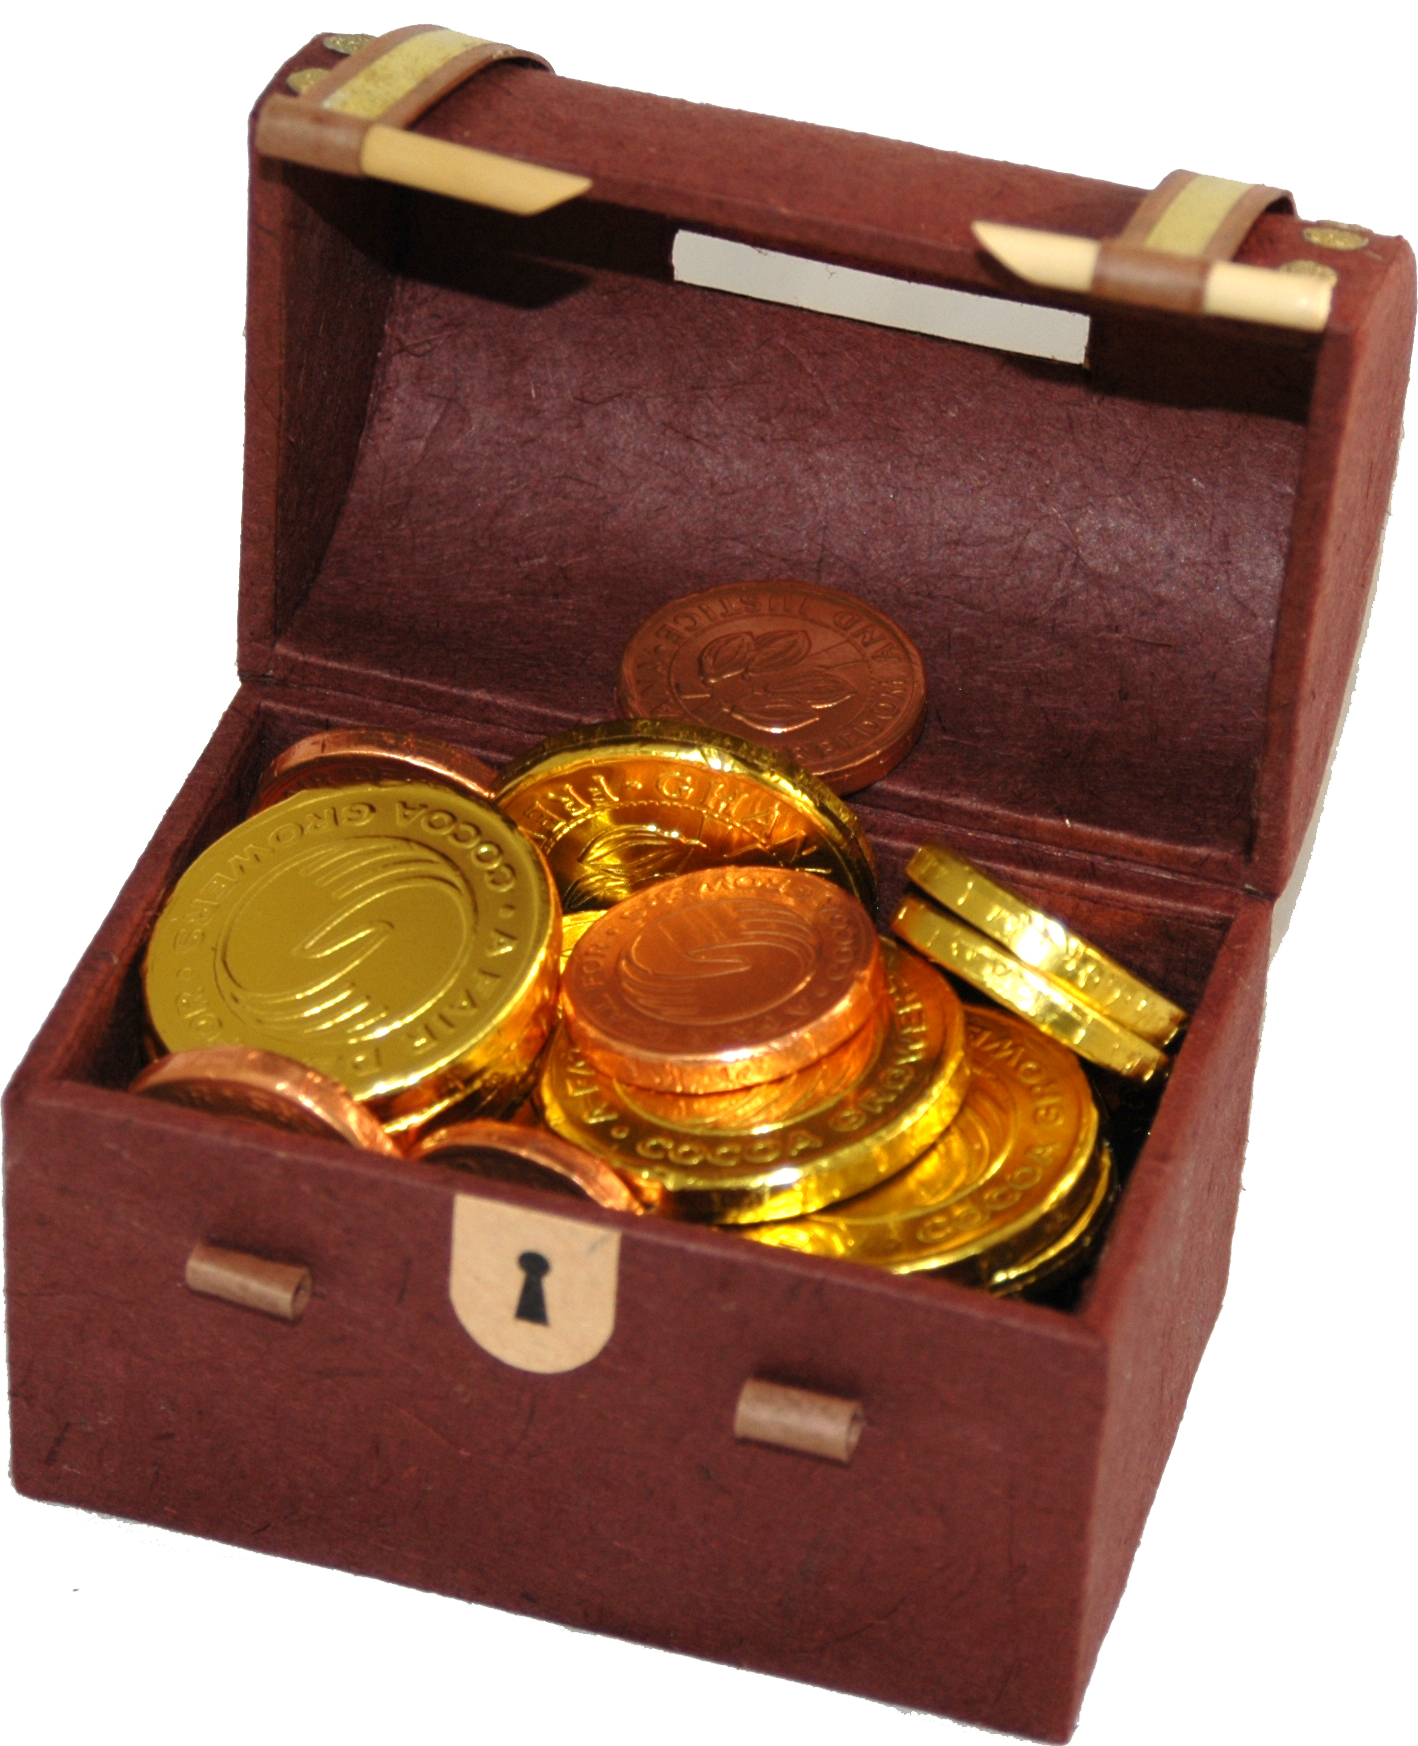 small chest full of chocolate coins